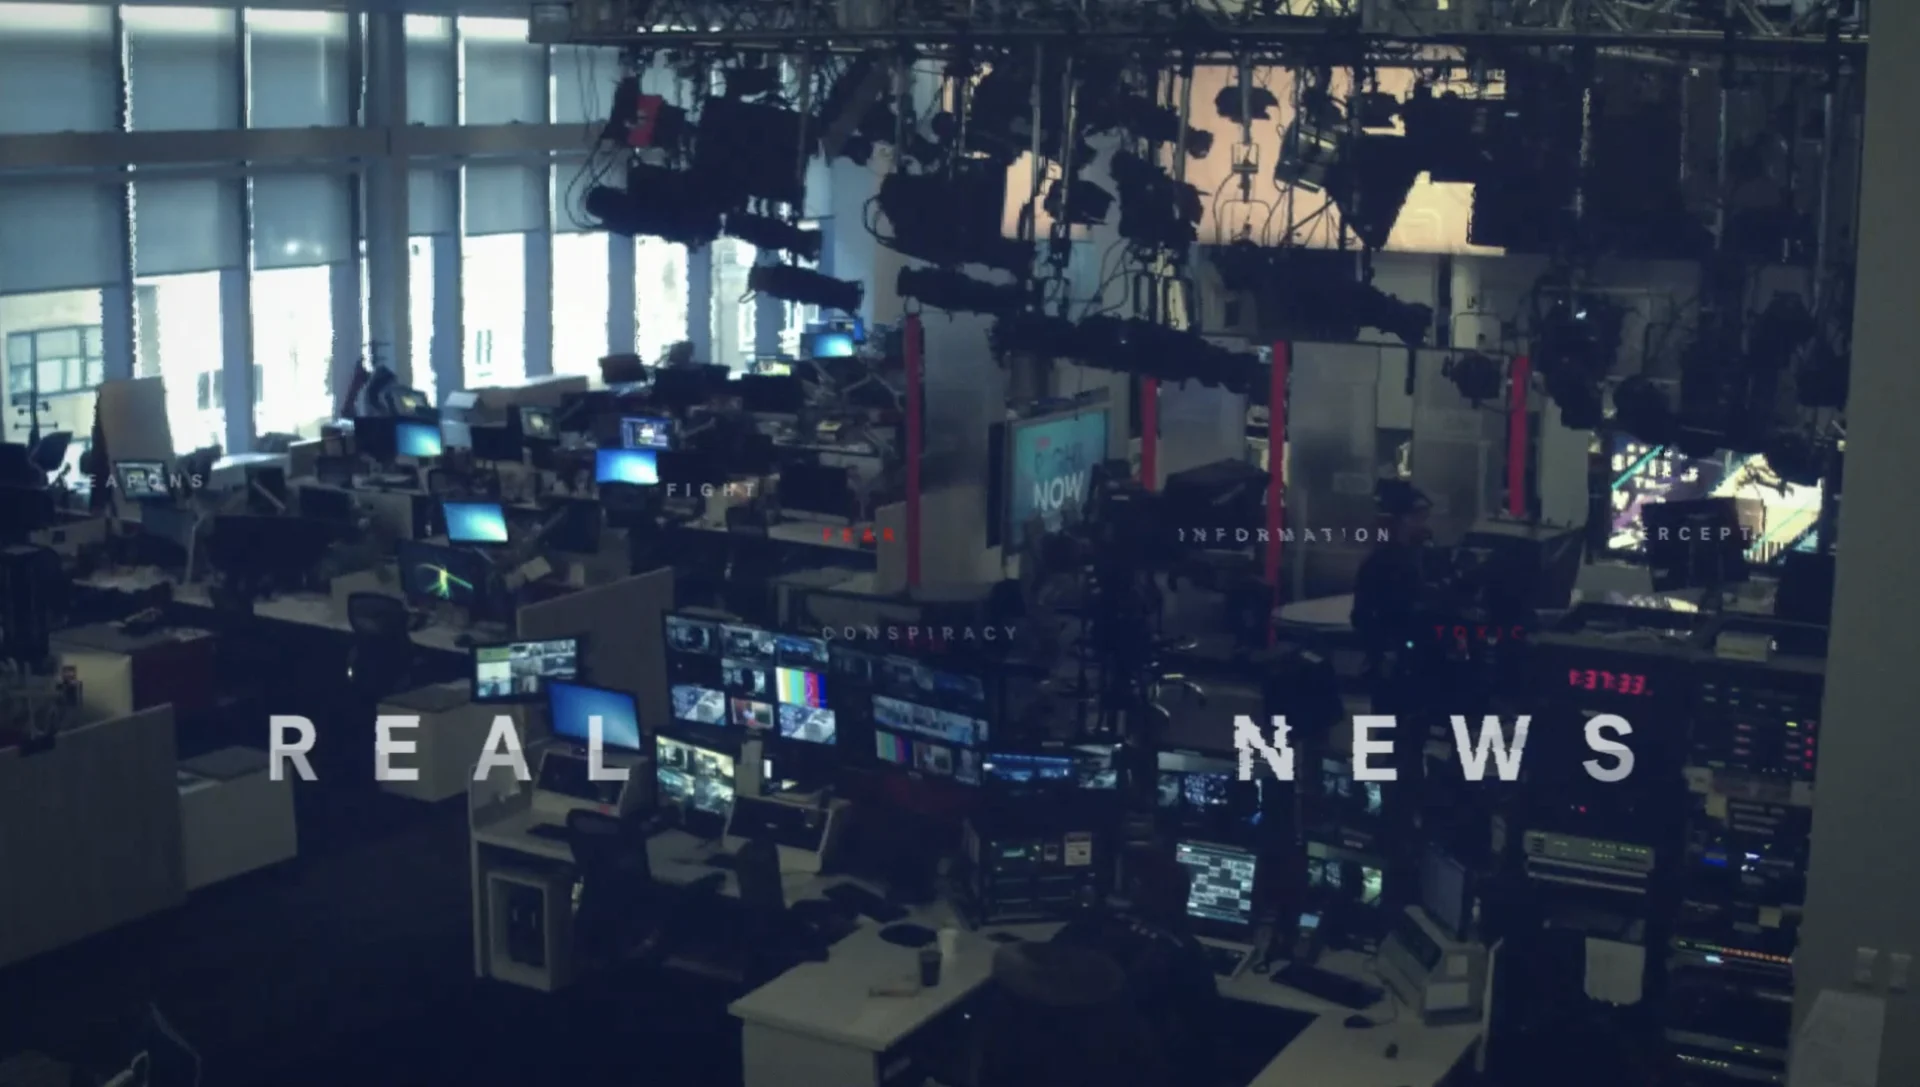 We enjoyed collaborating with longtime partner and director Andrew Rossi for the title sequence to his documentary. This film delves into the rising phenomenon of fake news and how it impacts Americans.